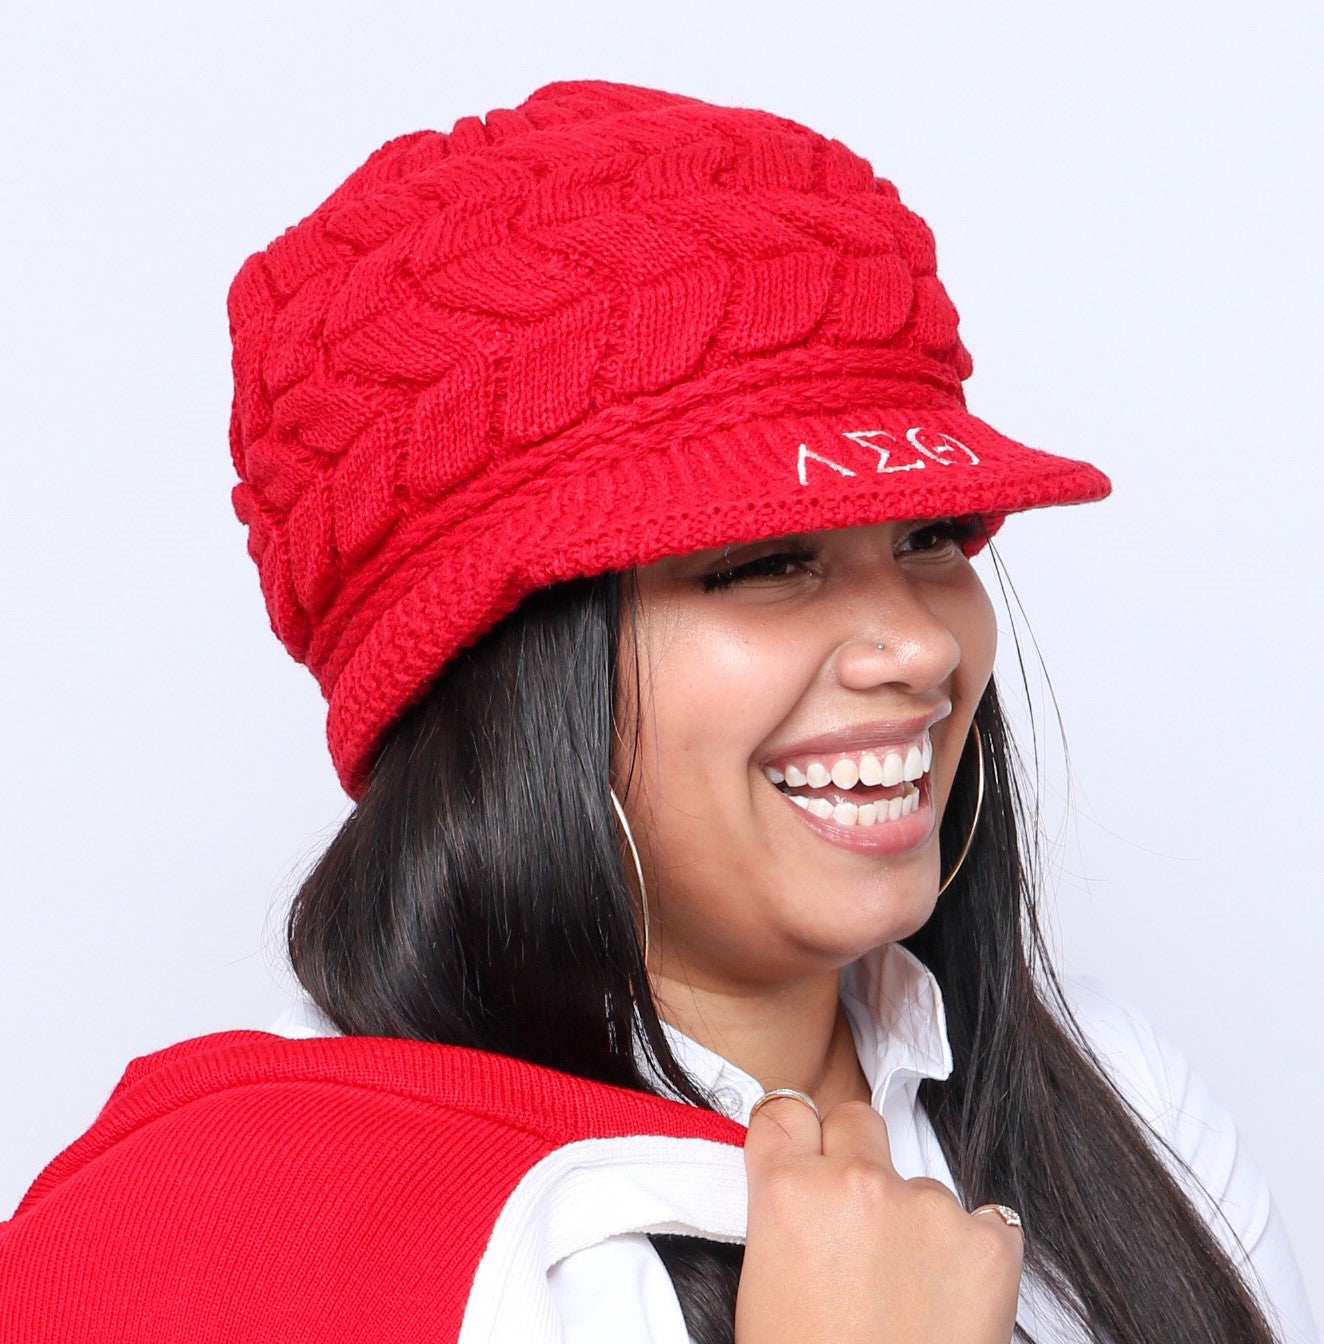 Delta Sigma Theta (ΔΣΘ) Sorority Red color Acrylic woolen Cap/Winter hat with Greek letters on it, Reusable & Washable.